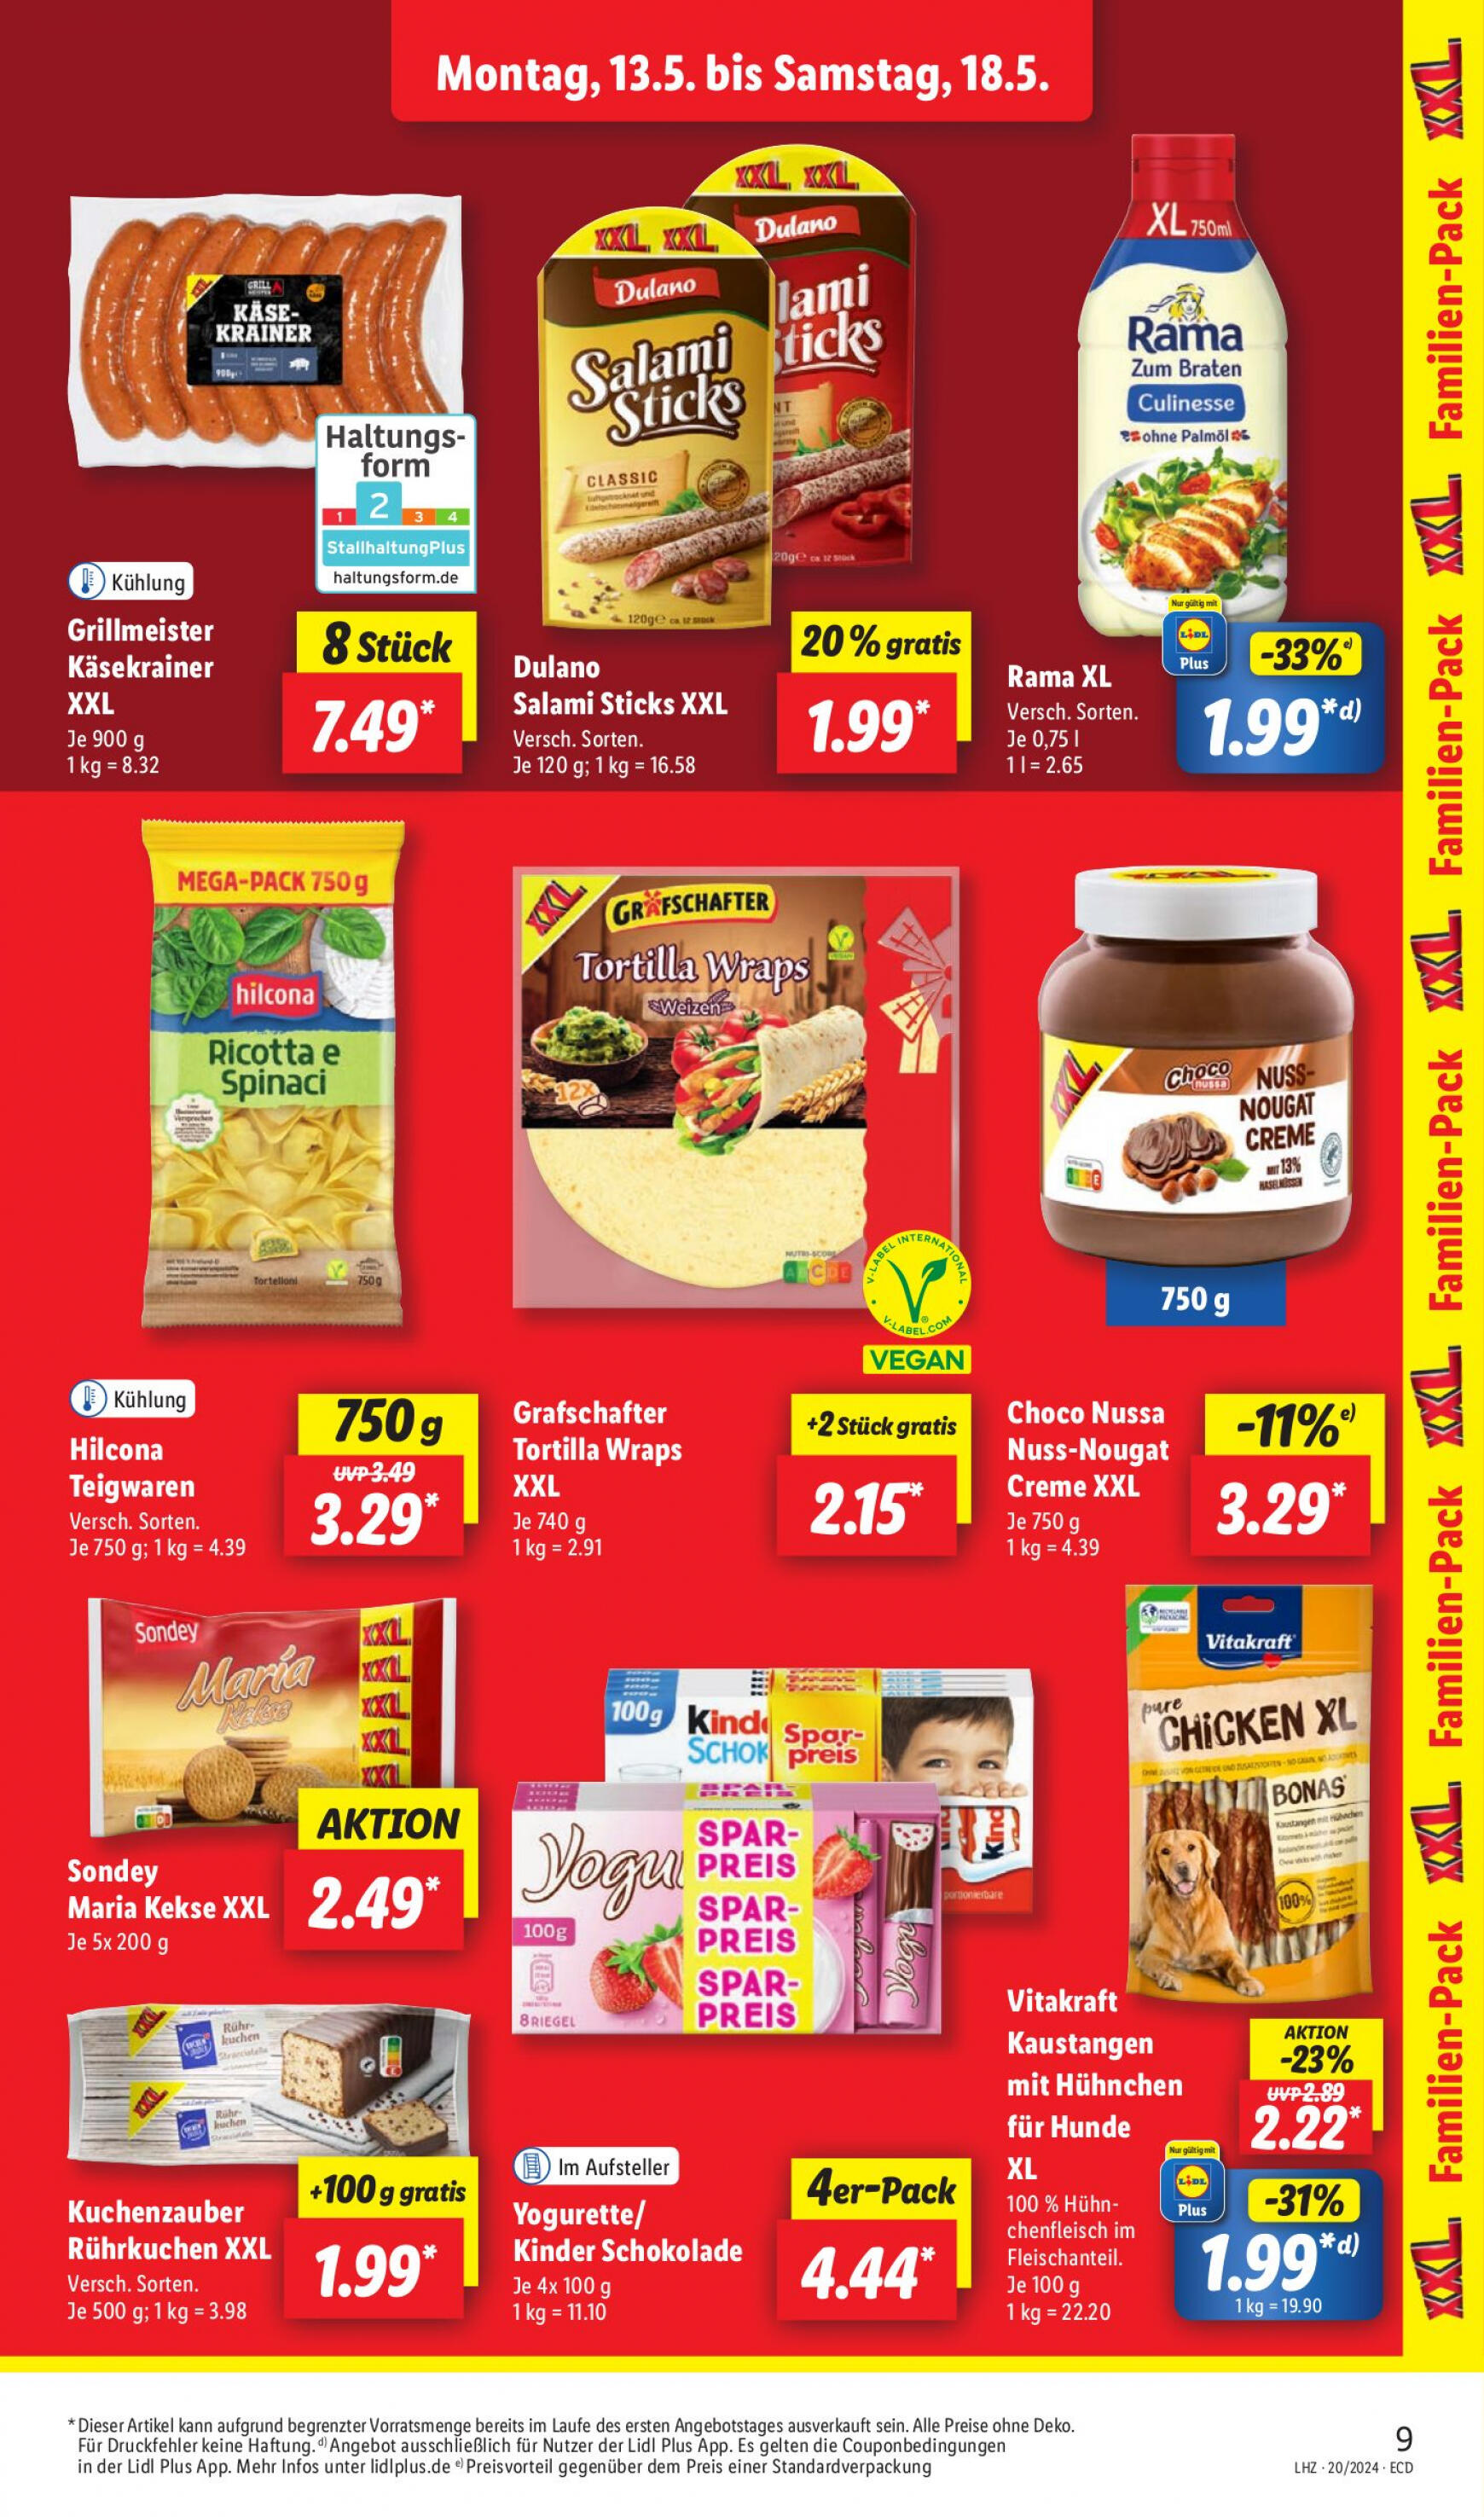 lidl - Flyer Lidl aktuell 13.05. - 18.05. - page: 11